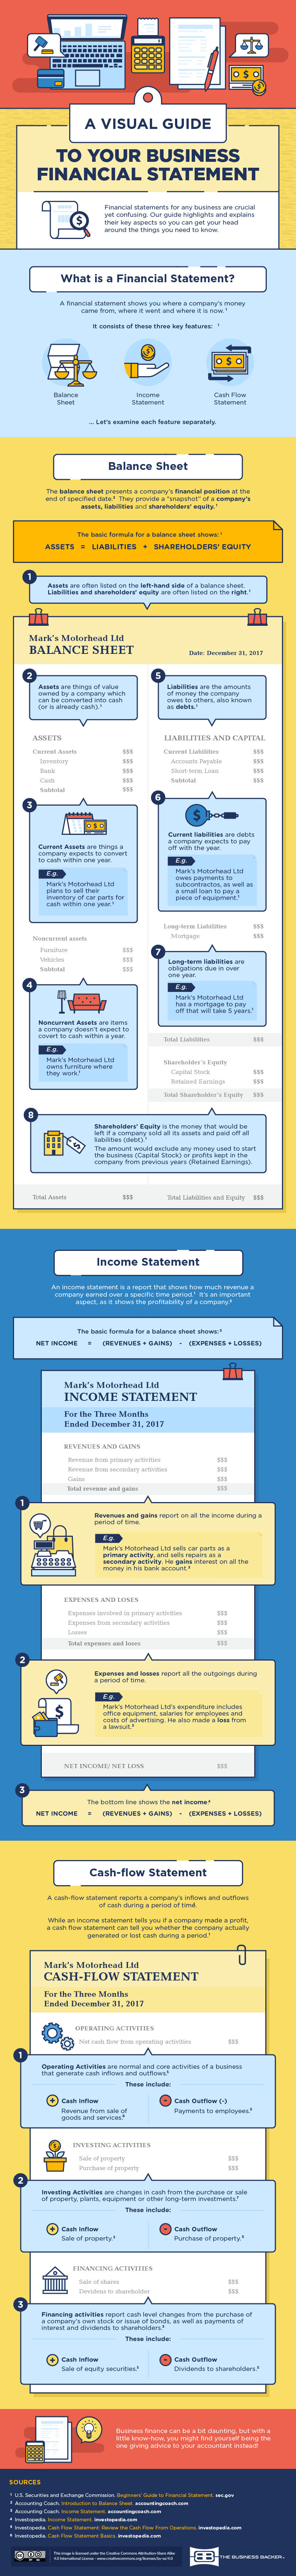 A Visual Guide to Understanding Your Financial Statement